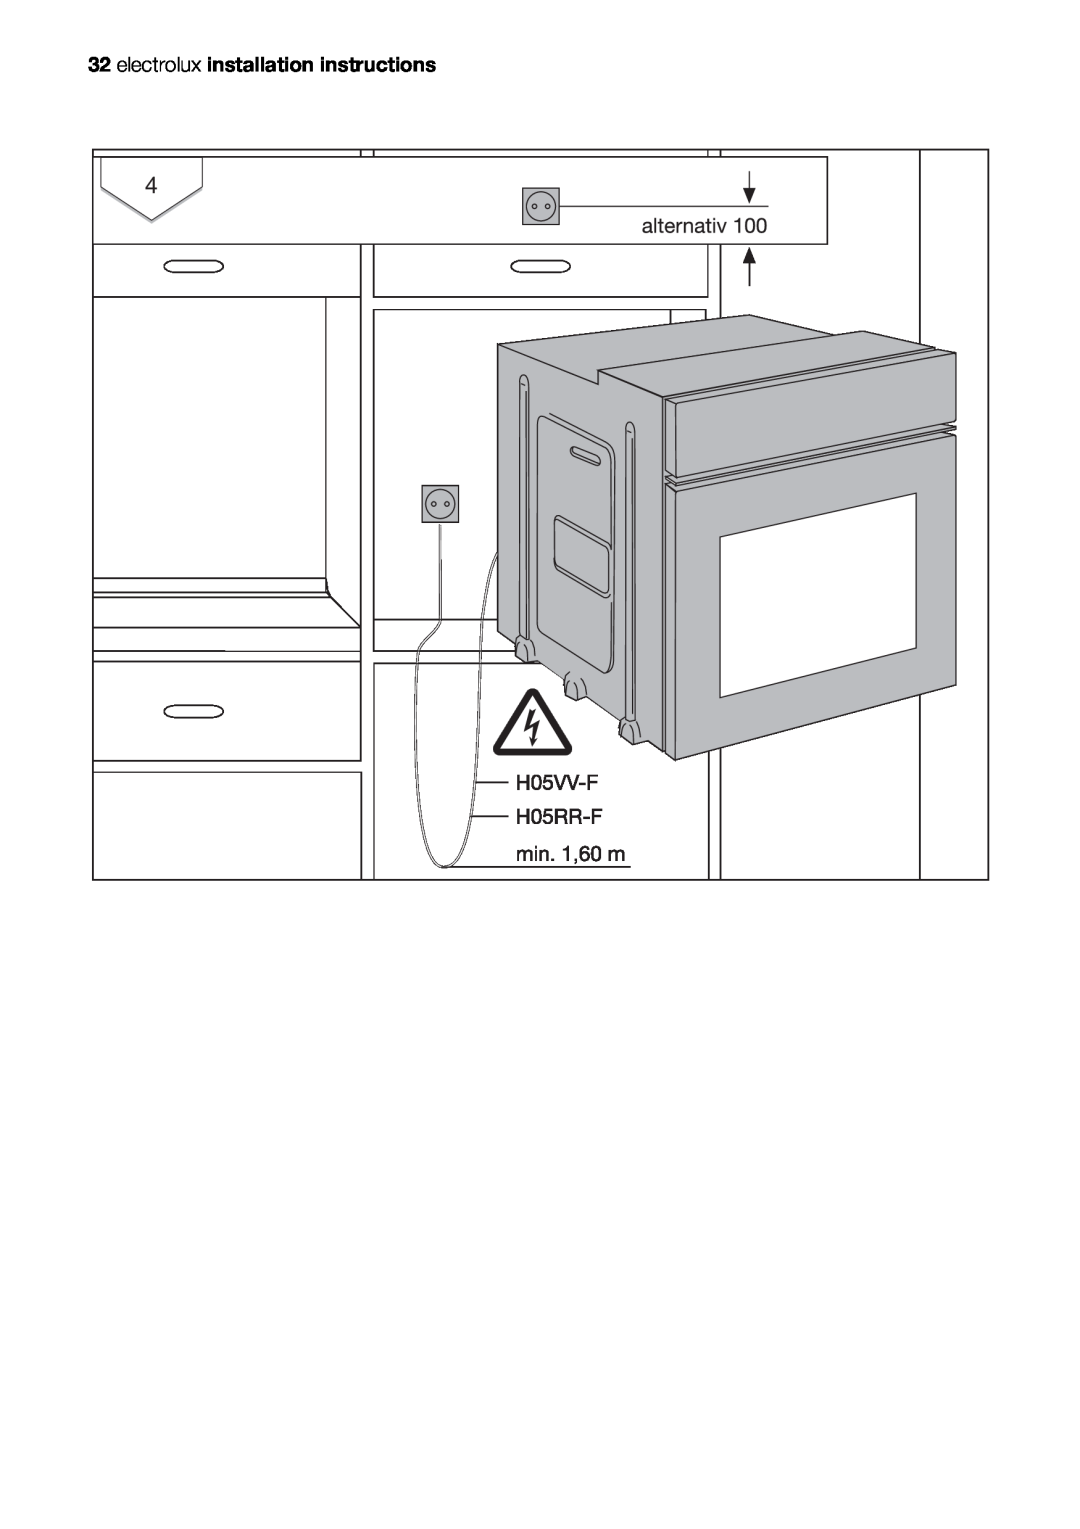 Electrolux EOB20001 user manual electrolux installation instructions 